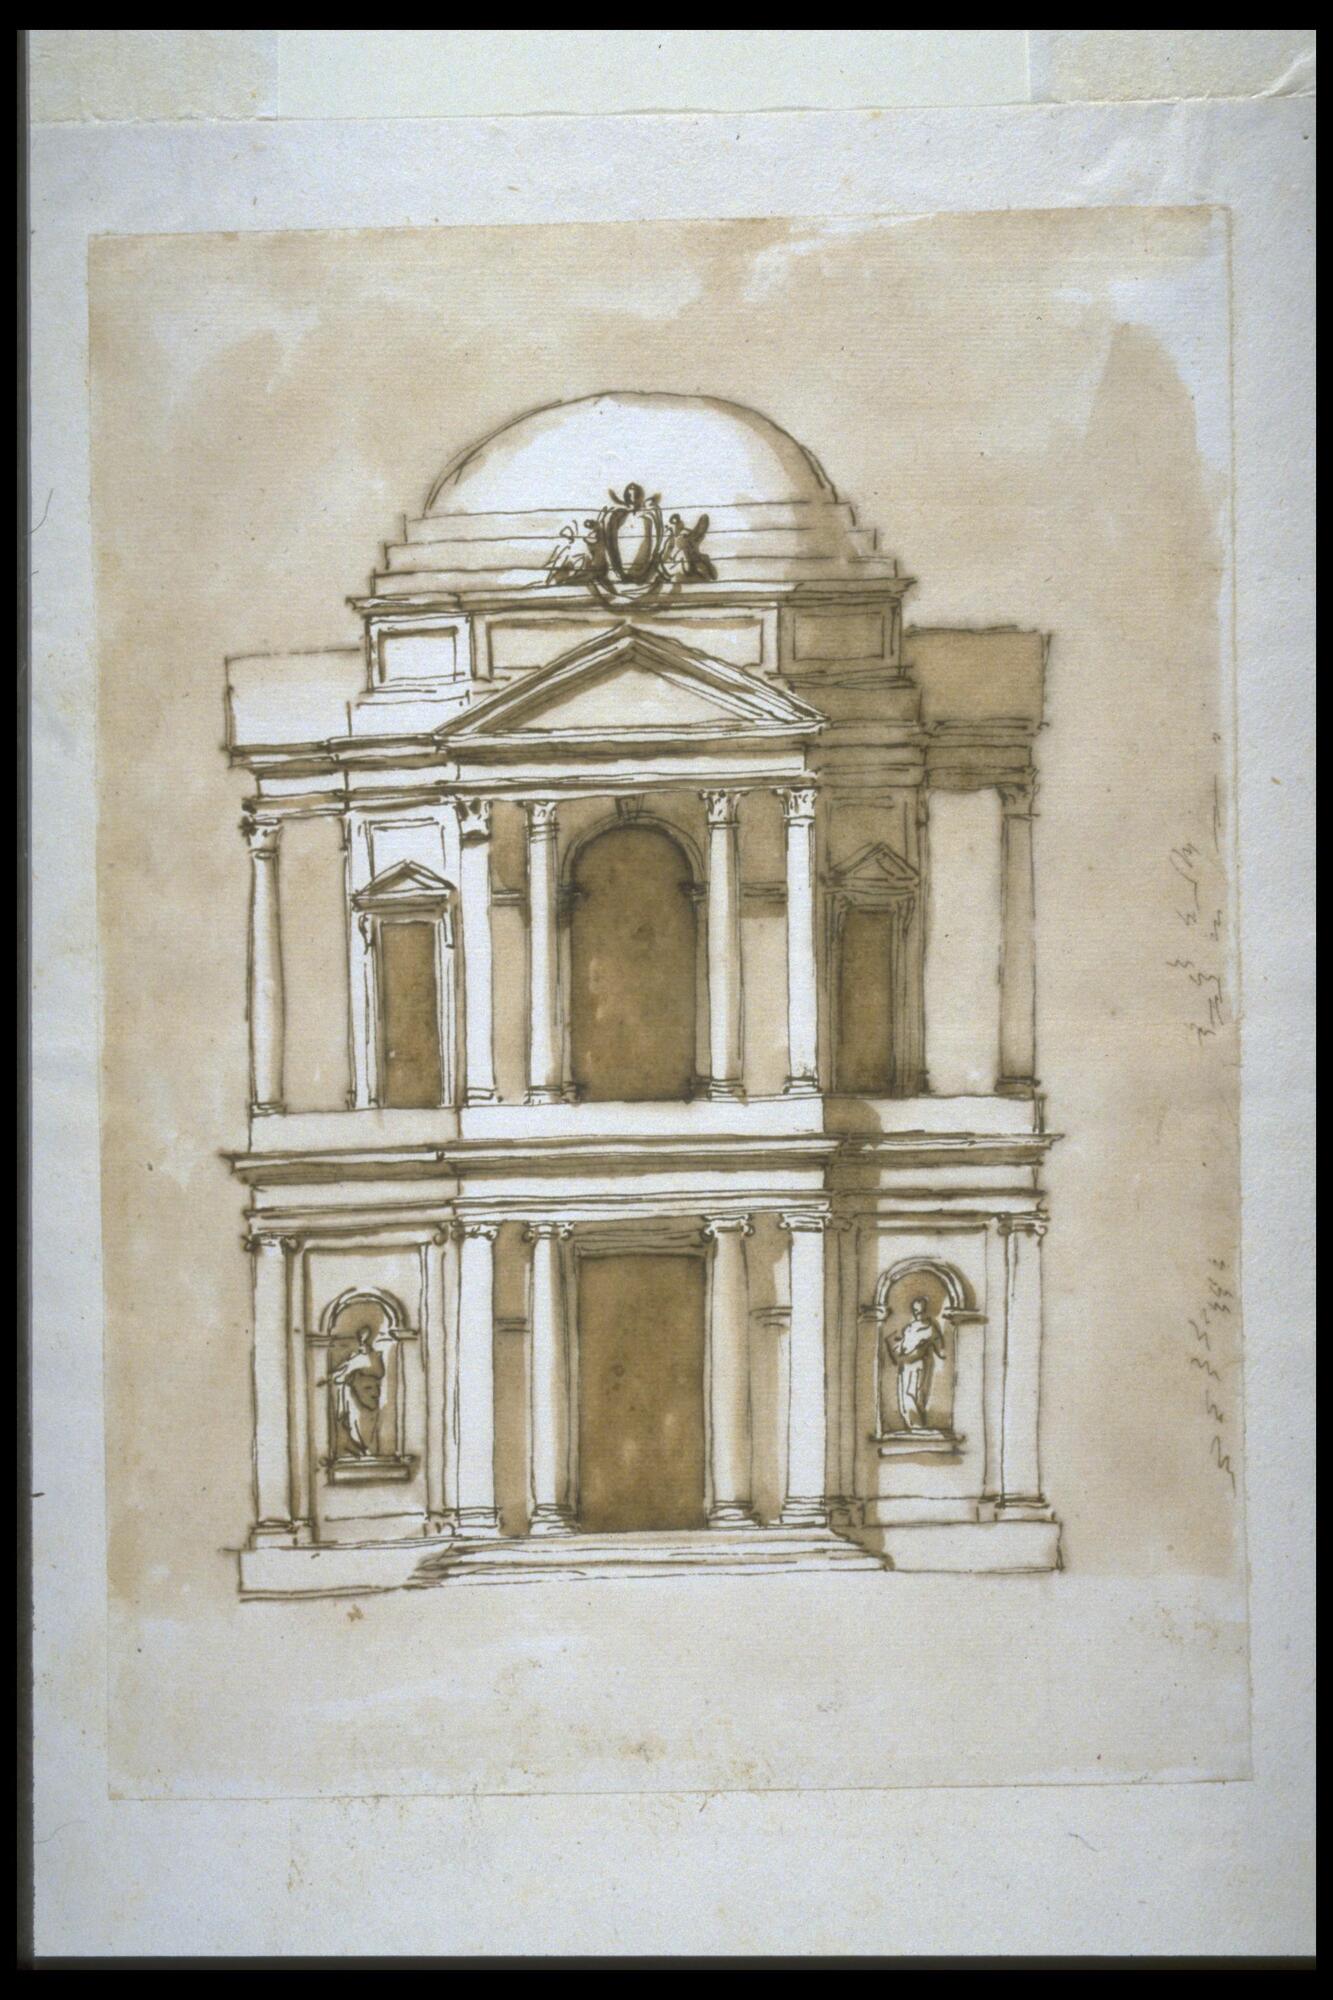 This drawing presents a frontal view of a small two-story church.  The first level has a portico entrance flanked by statues in niches.  Above the portico continues into the second level and is surmounted by a pediment.  Above the second level is a shallow dome on a low drum.